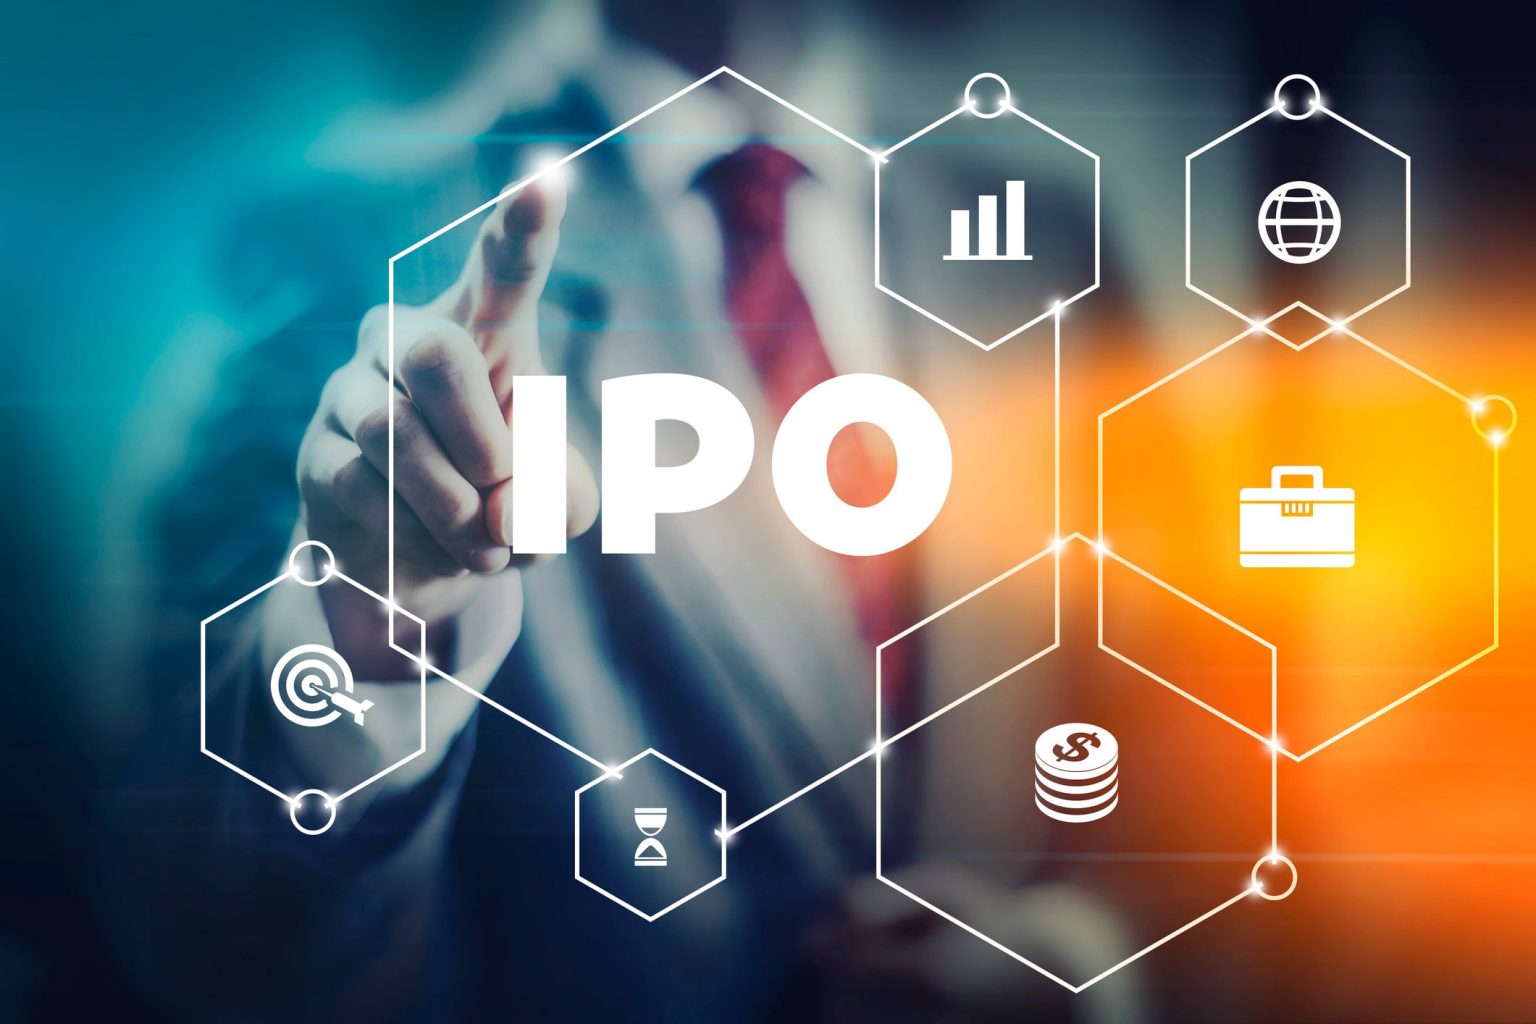 pabc-ipo-general-subscription-to-start-from-june-29-daily-times